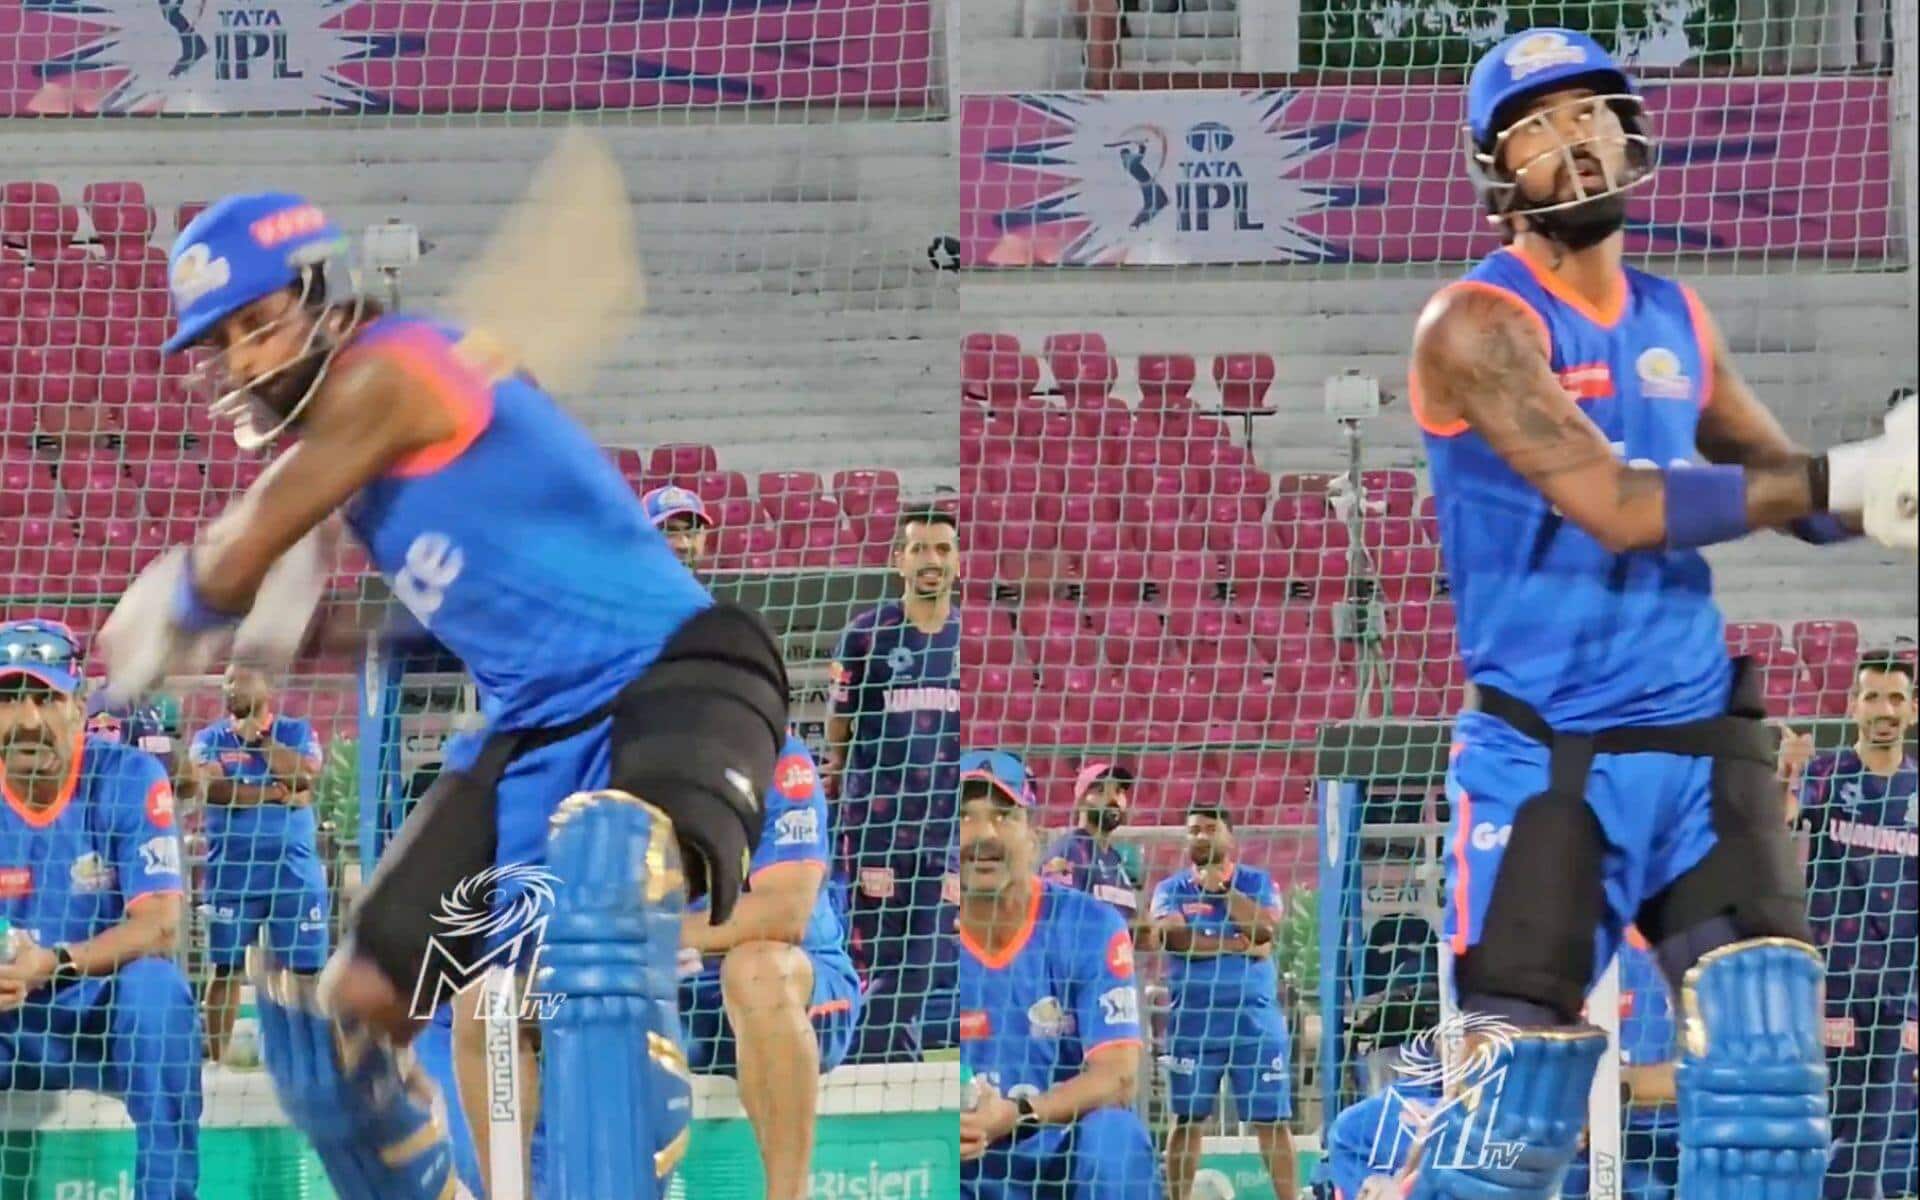 Chahal looking from back as Hardik Pandya smashes a six (X.com)